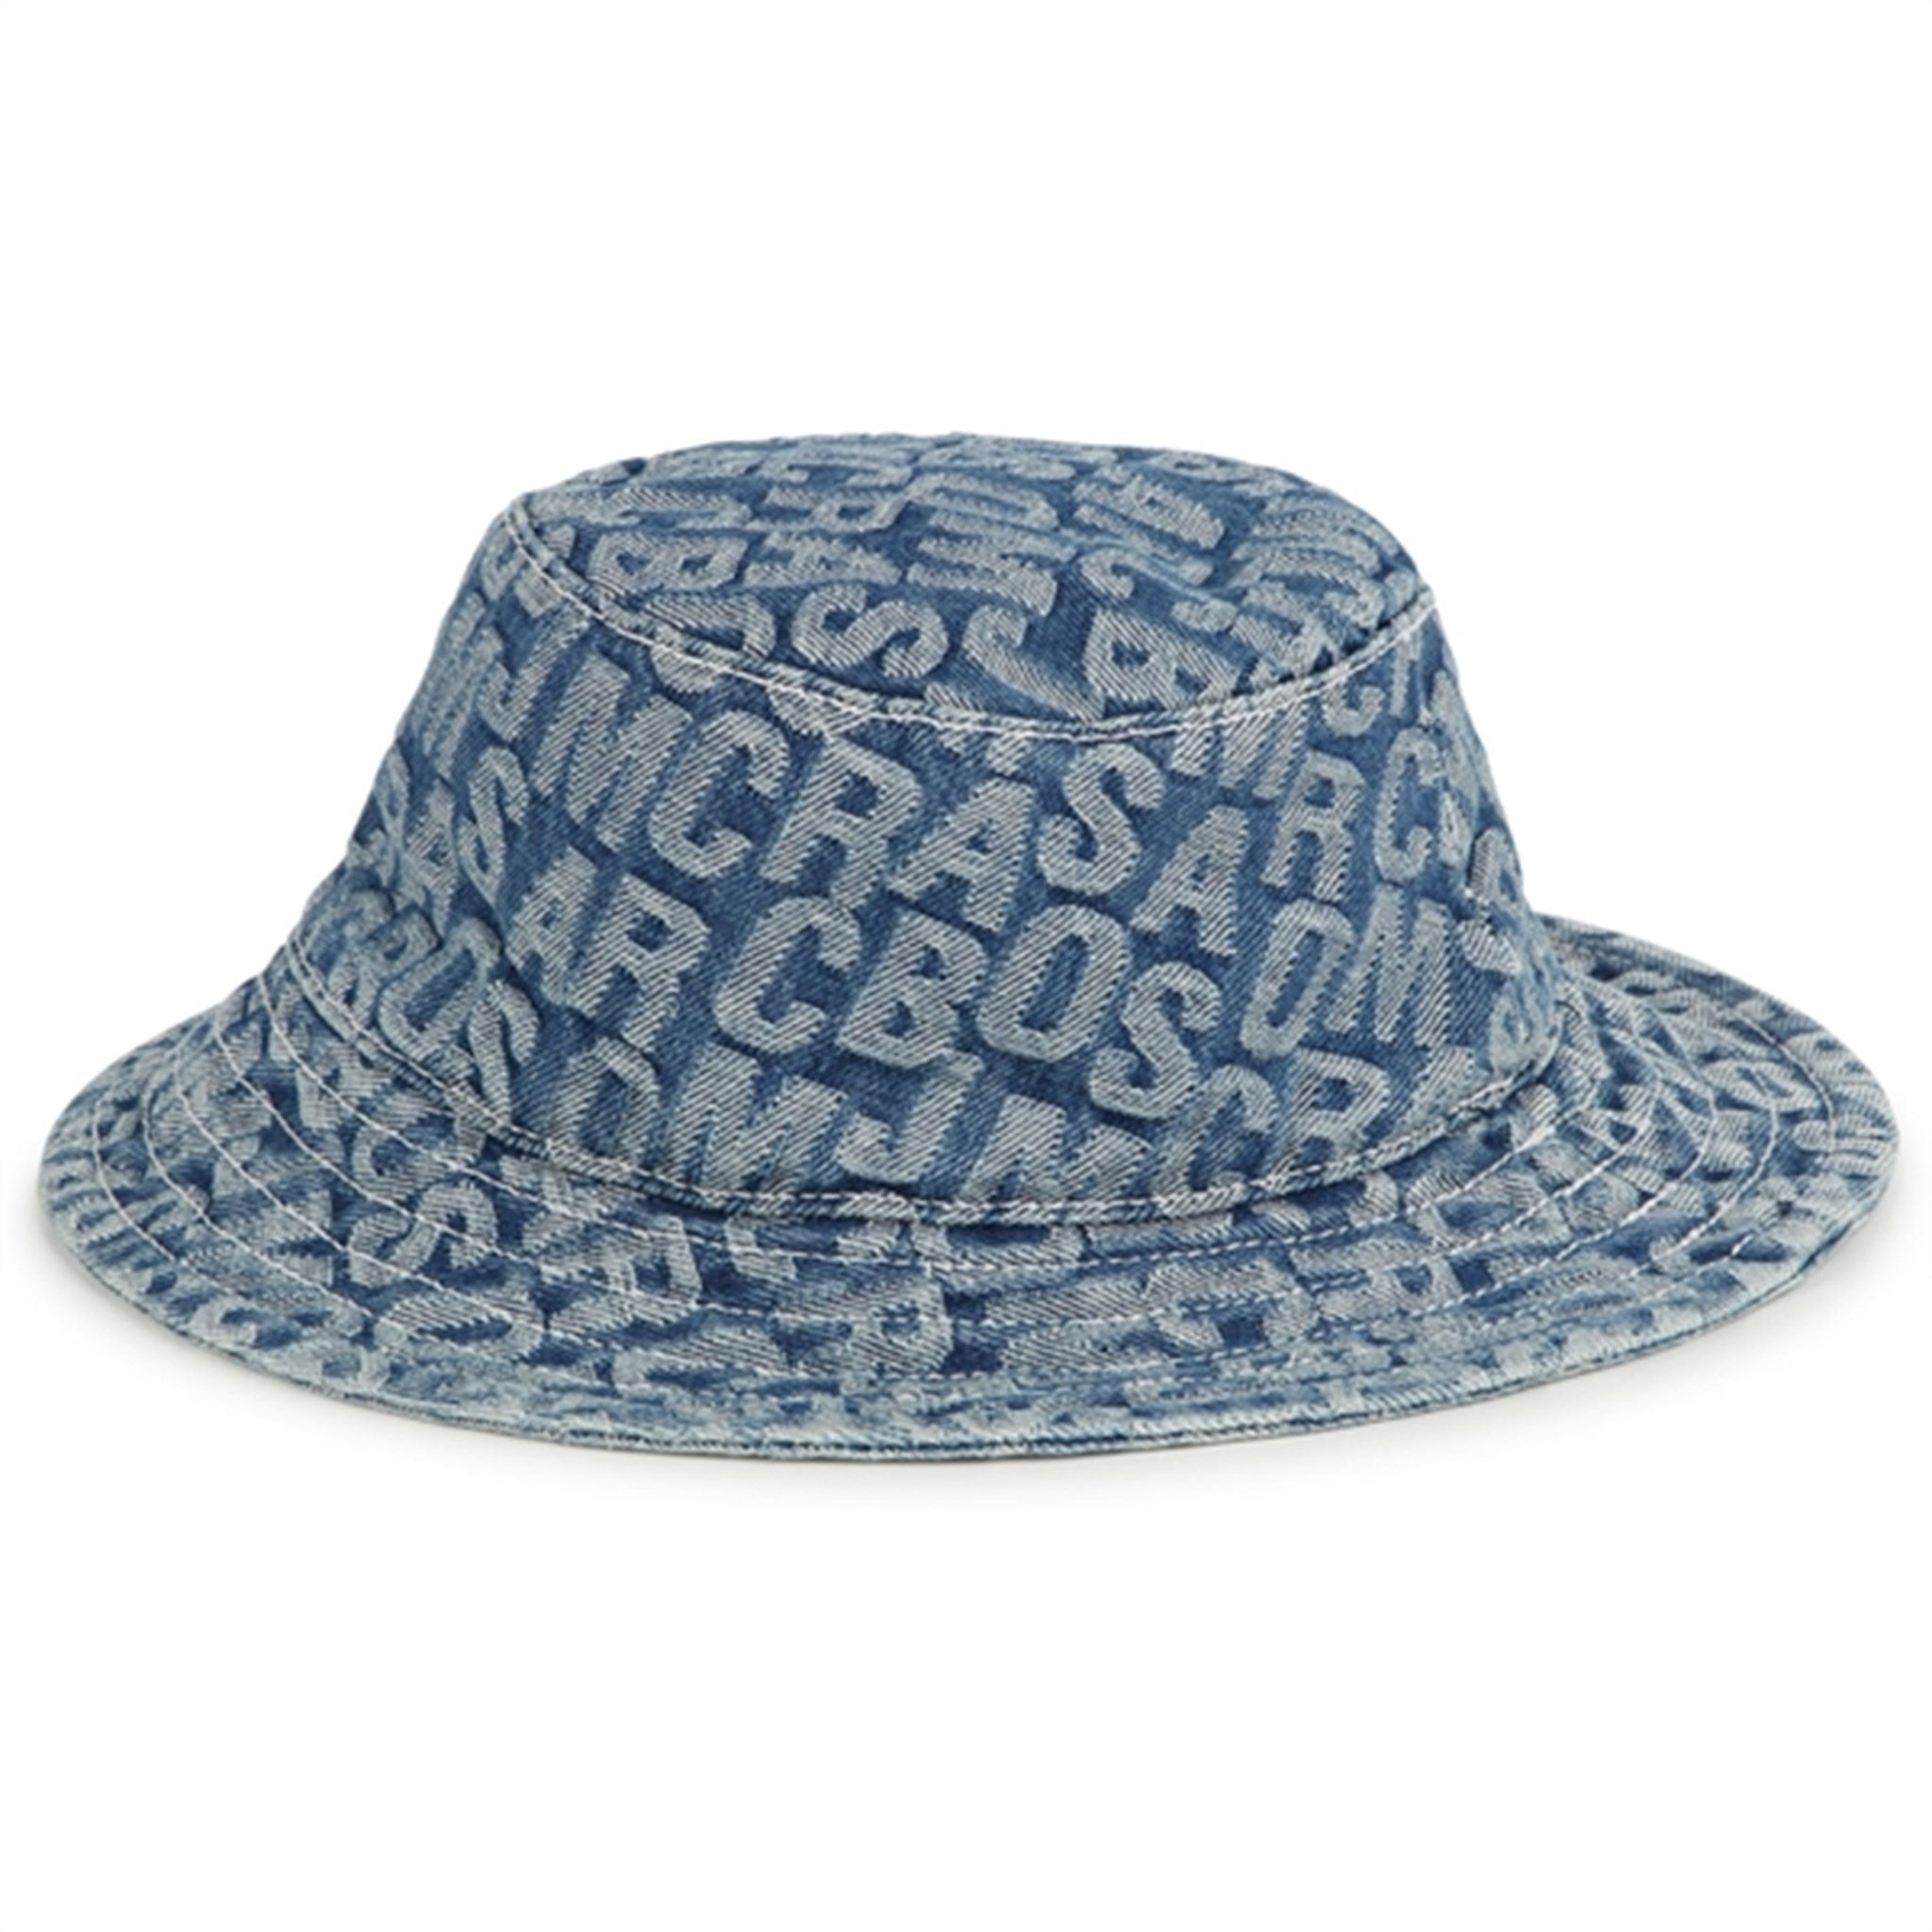 SA Fishing Hat Boonie Bucket Hat By The Game Navy Blue